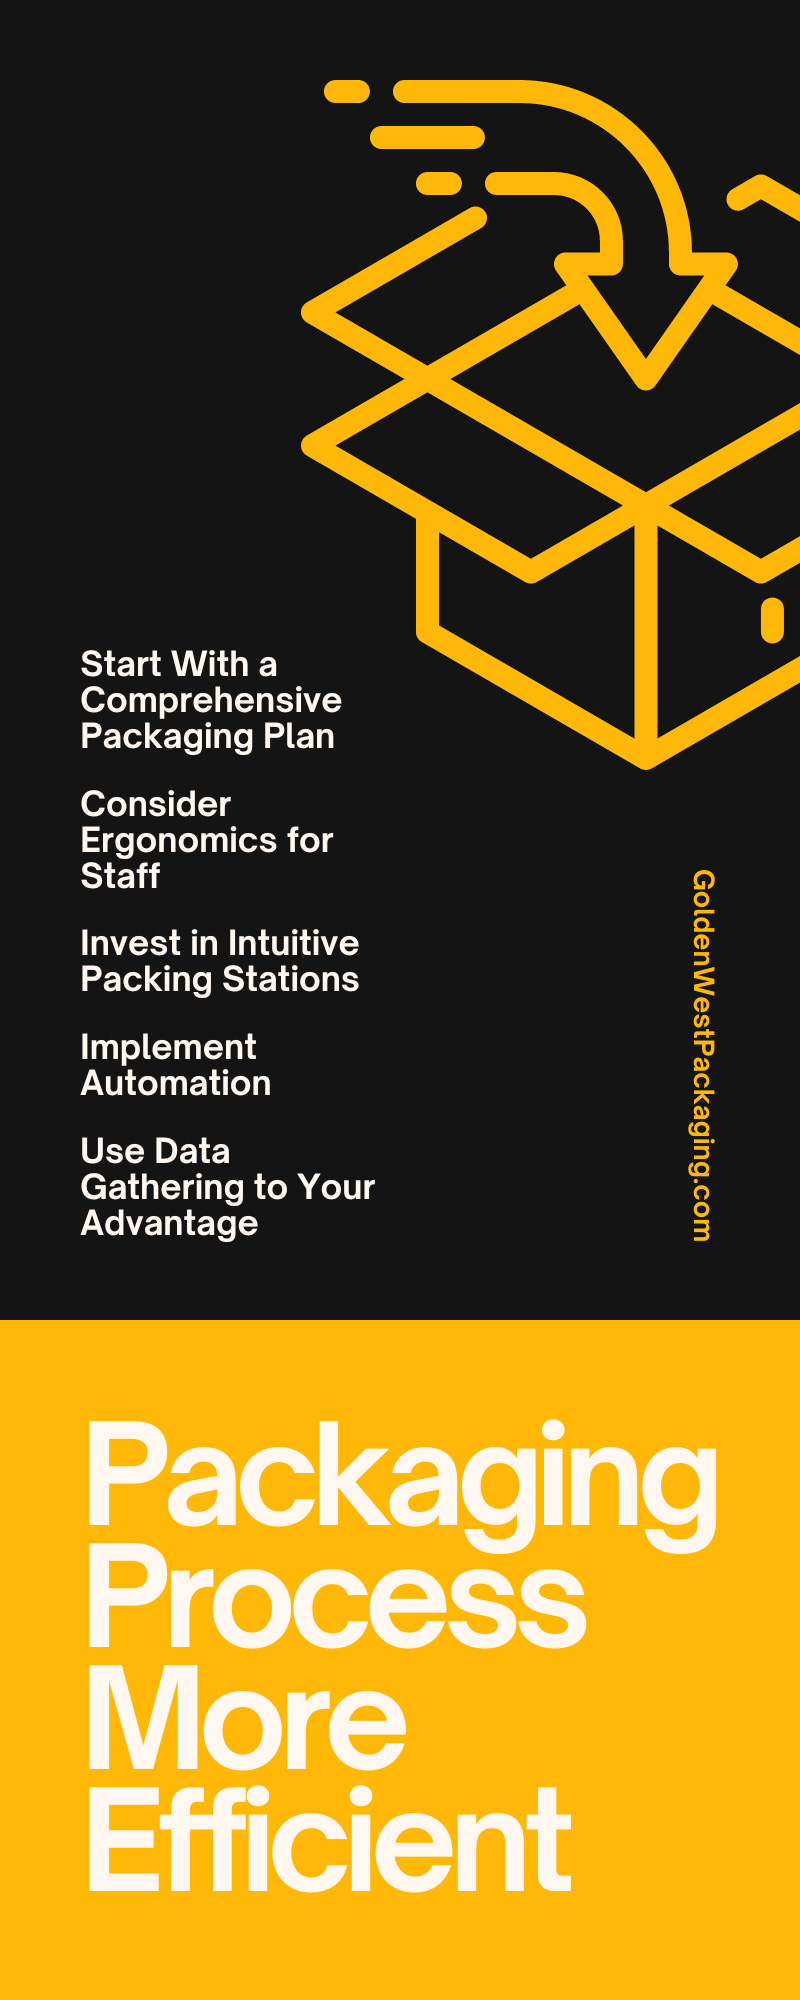 Ways To Make Your Packaging Process More Efficient